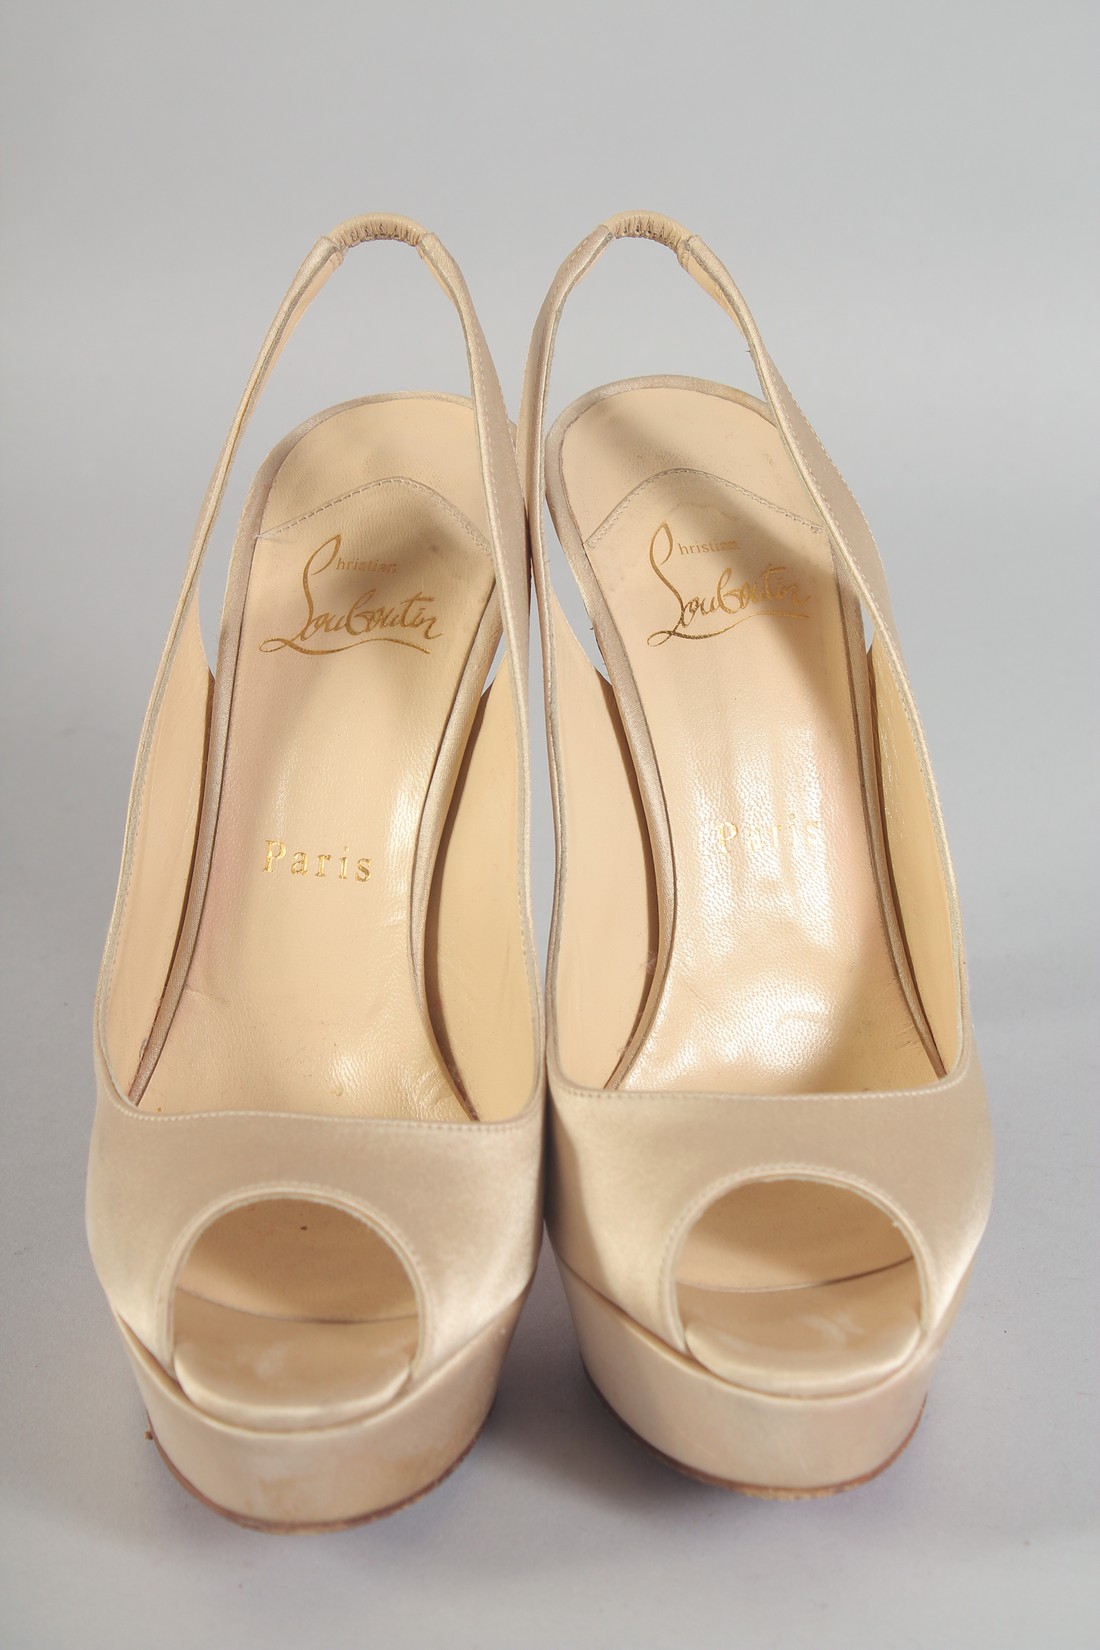 A PAIR OF CHRISTIAN LOUBOUTIN BEIGE SHOES, and five heal tips. Size 37. - Bild 2 aus 5